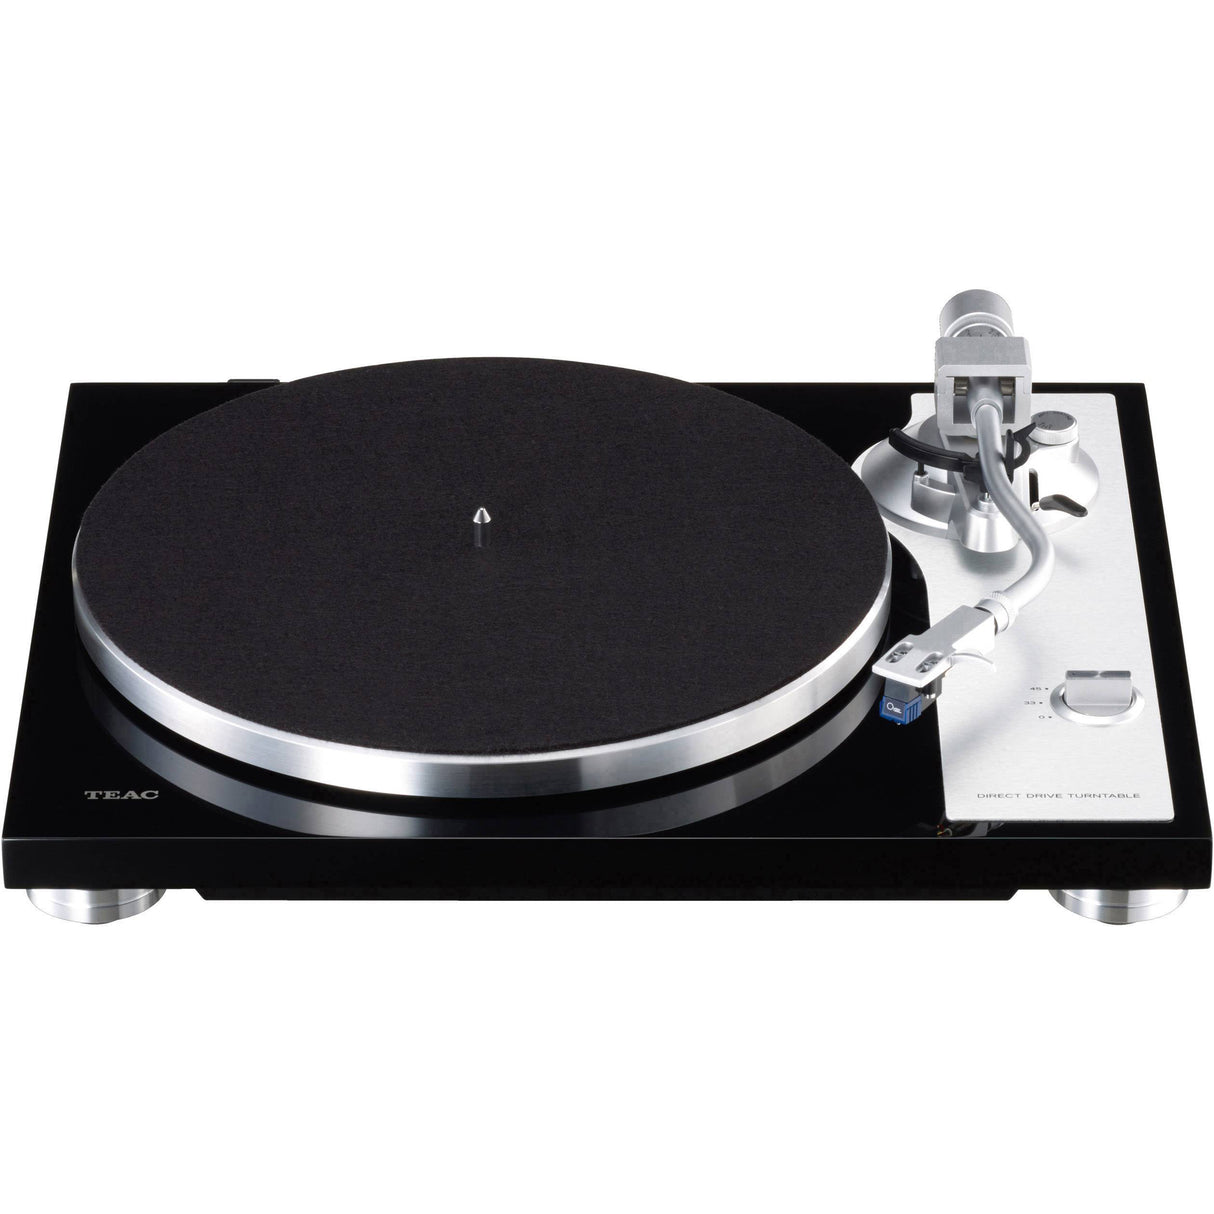 TEAC TN-4D - Turntable with Phono Stage & USB